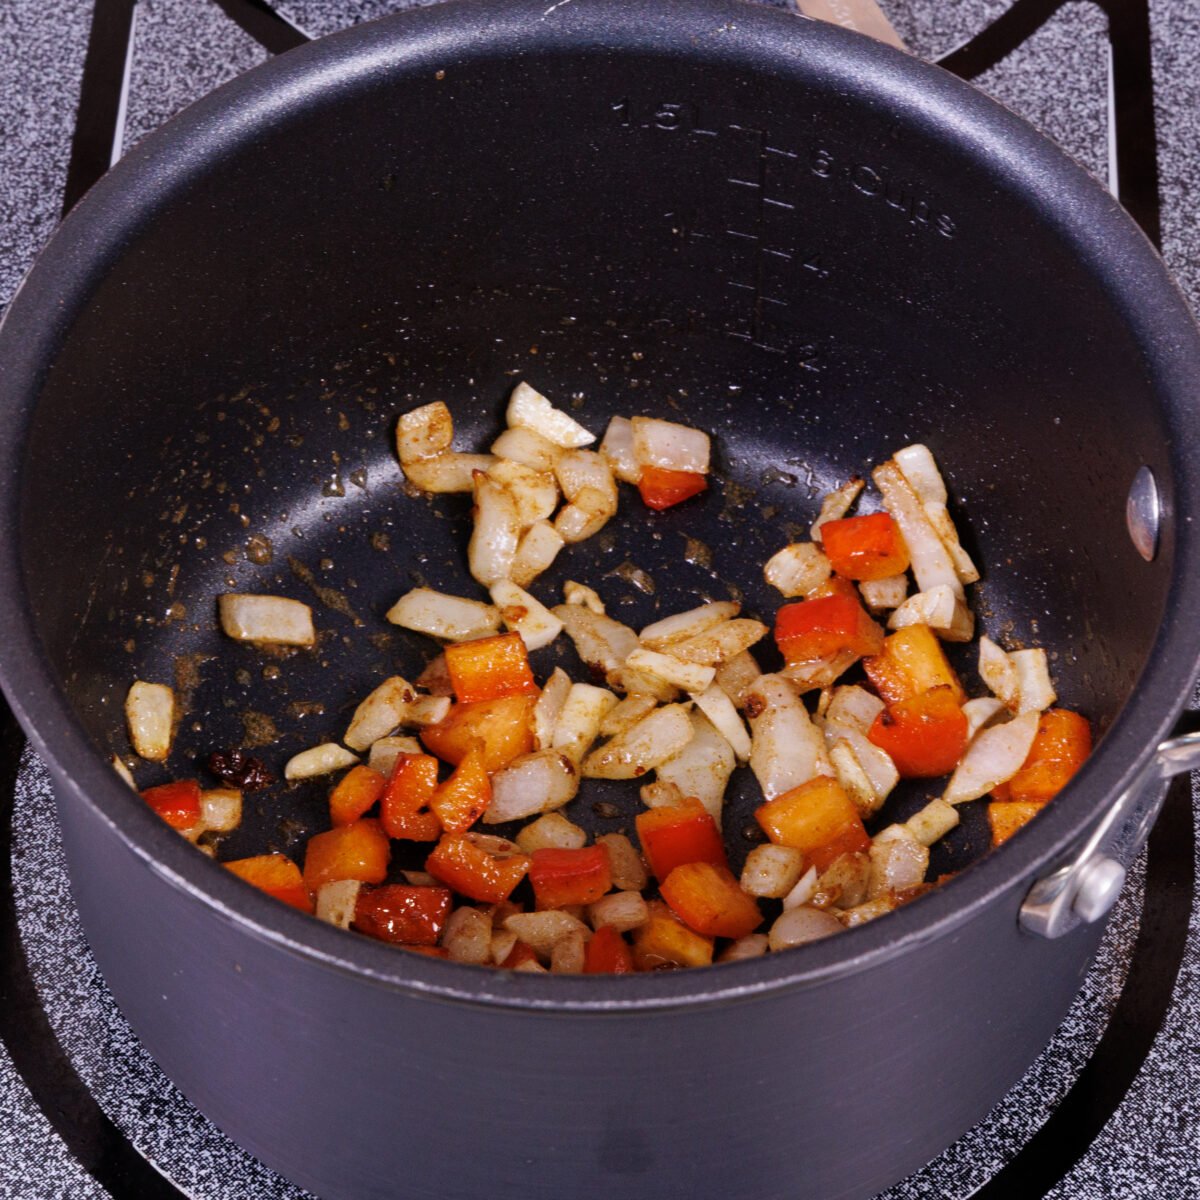 chopped onions, peppers, garlic and seasoning sauteeing in a small pot.